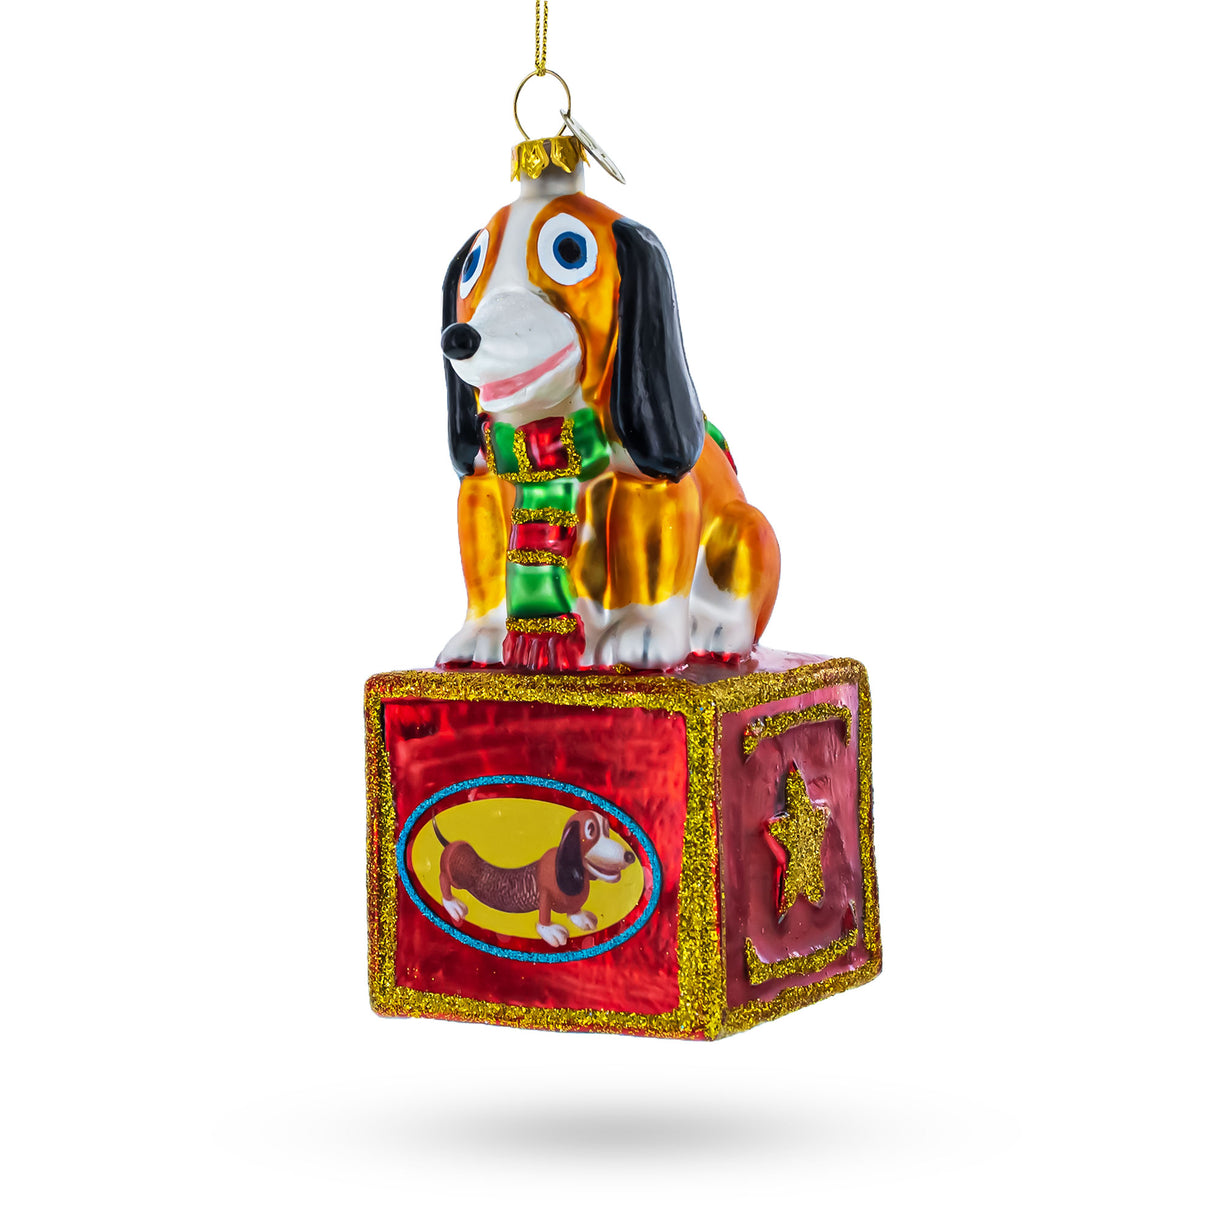 Playful Toy Dog on Festive Red Box - Blown Glass Christmas Ornament in Multi color,  shape